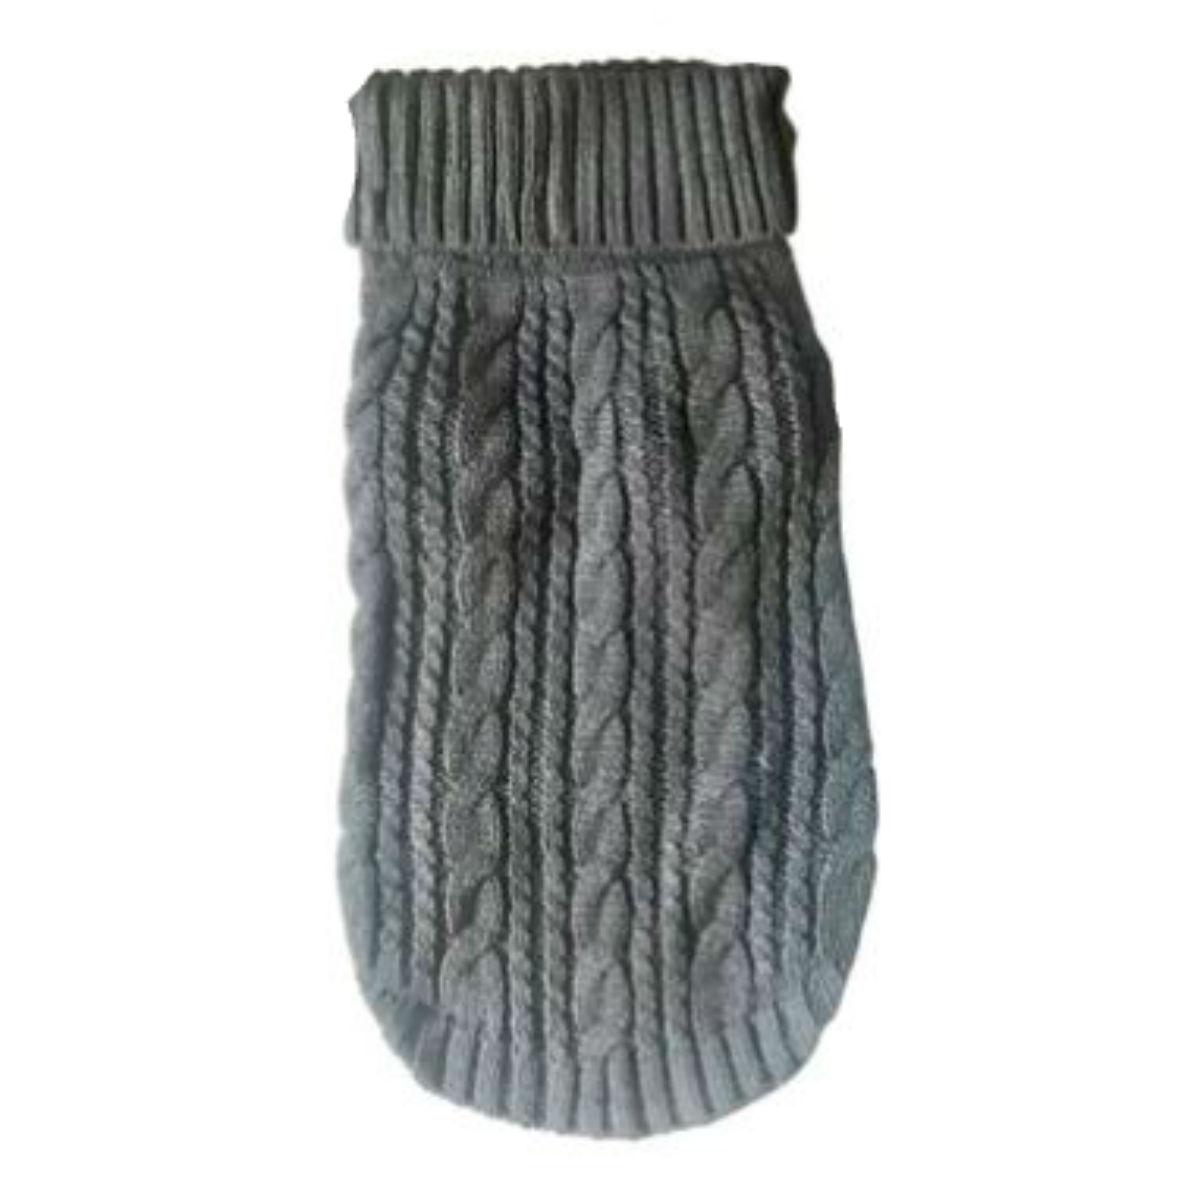 The Dog Squad Scottish Cable Knit Dog Sweater - Charcoal Gray